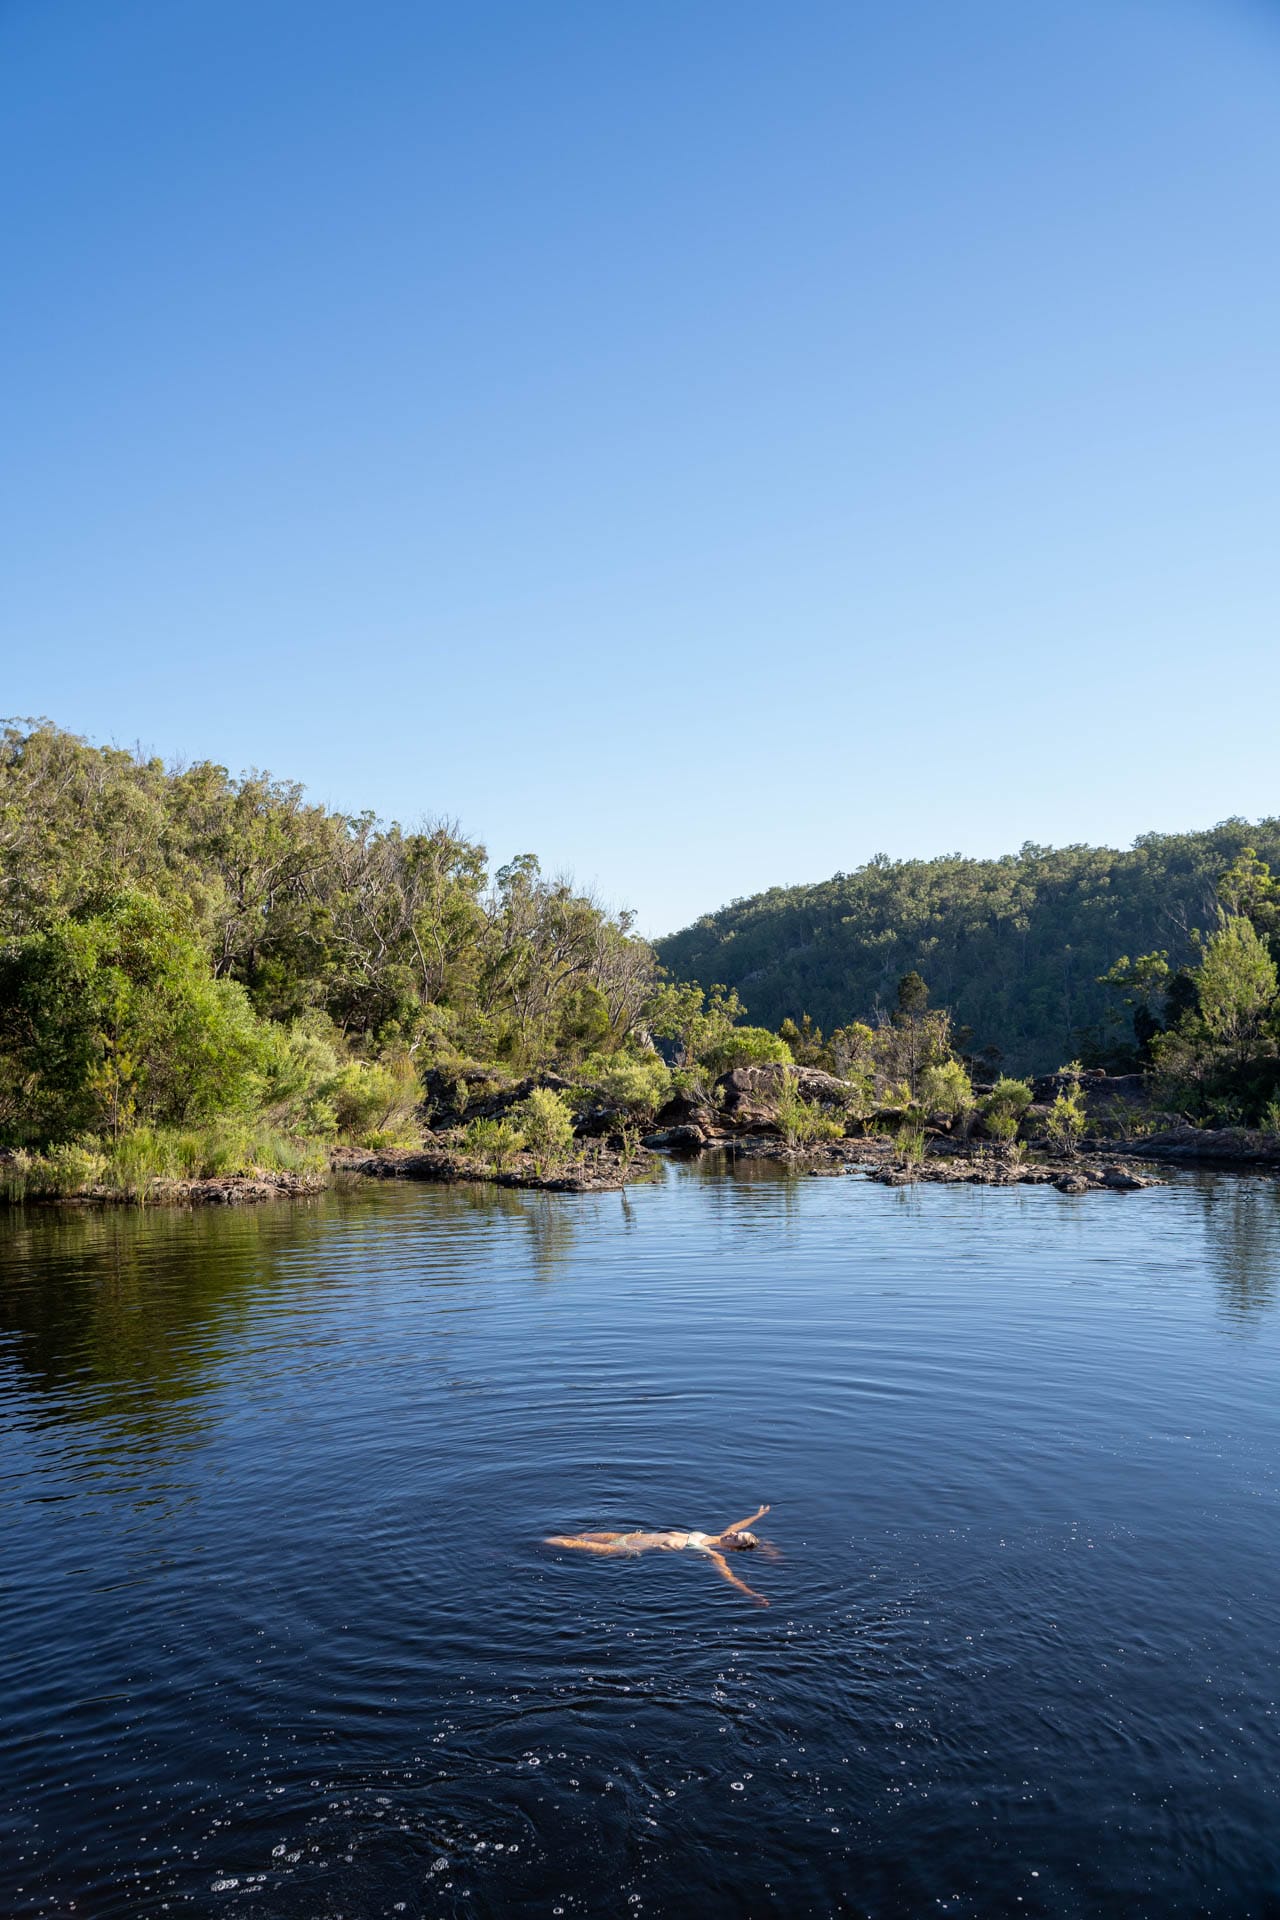 A Weekend in Tenterfield: Where to Stay, Adventure, and Eat, constance allan, boonoo boonoo falls, swimming hole